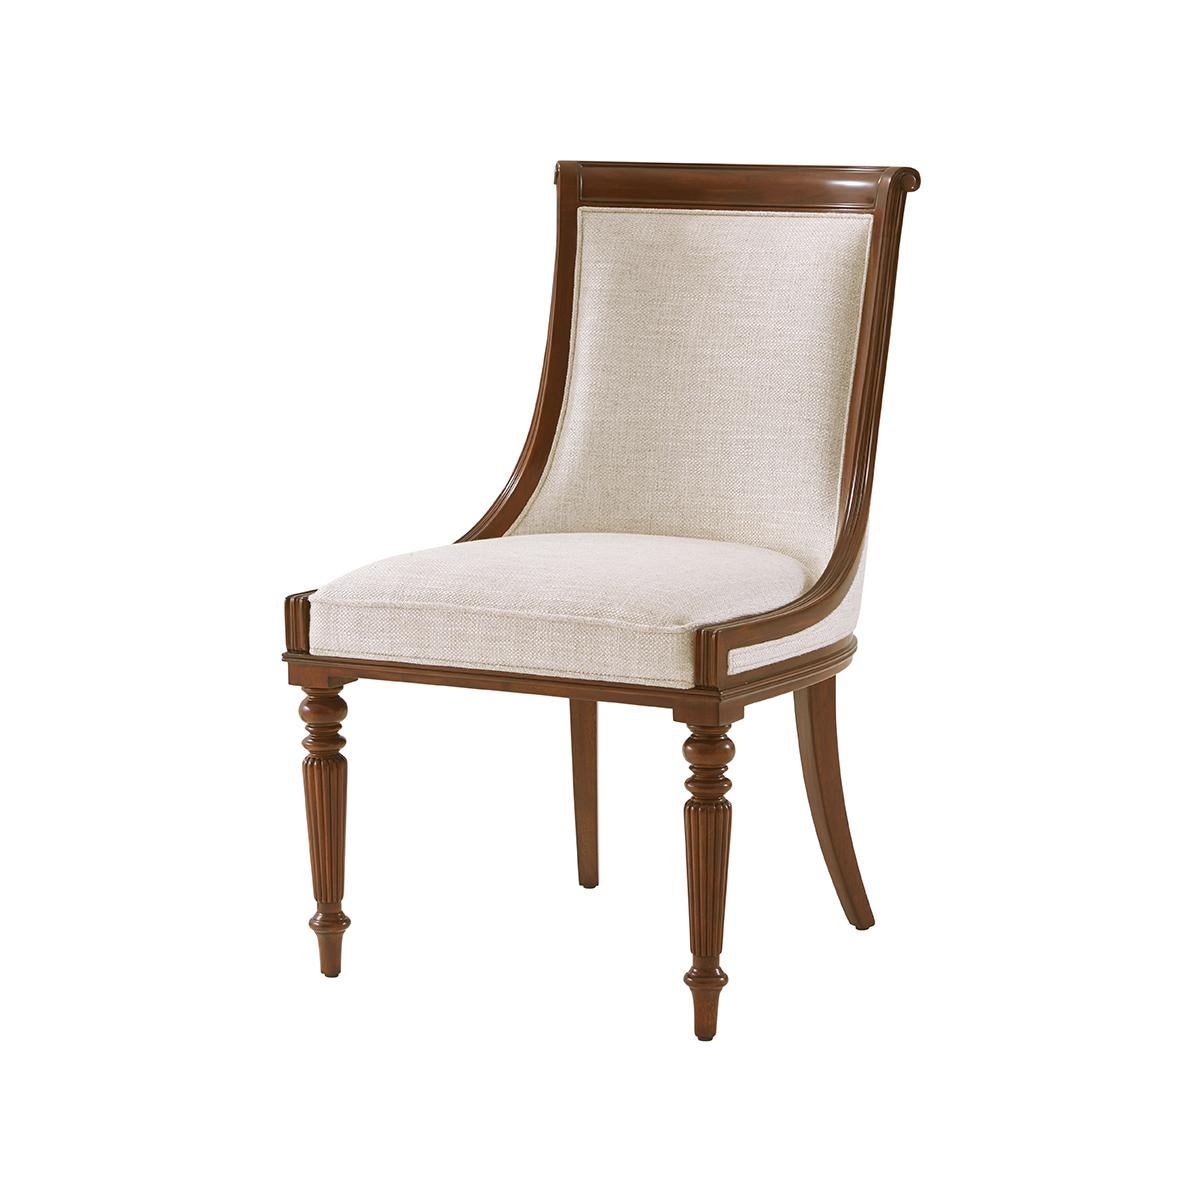 Carved mahogany scoop back dining chairs with a paneled and upholstered backrest, beautifully carved frame on turned and reeded legs.

Dimensions: 22.5